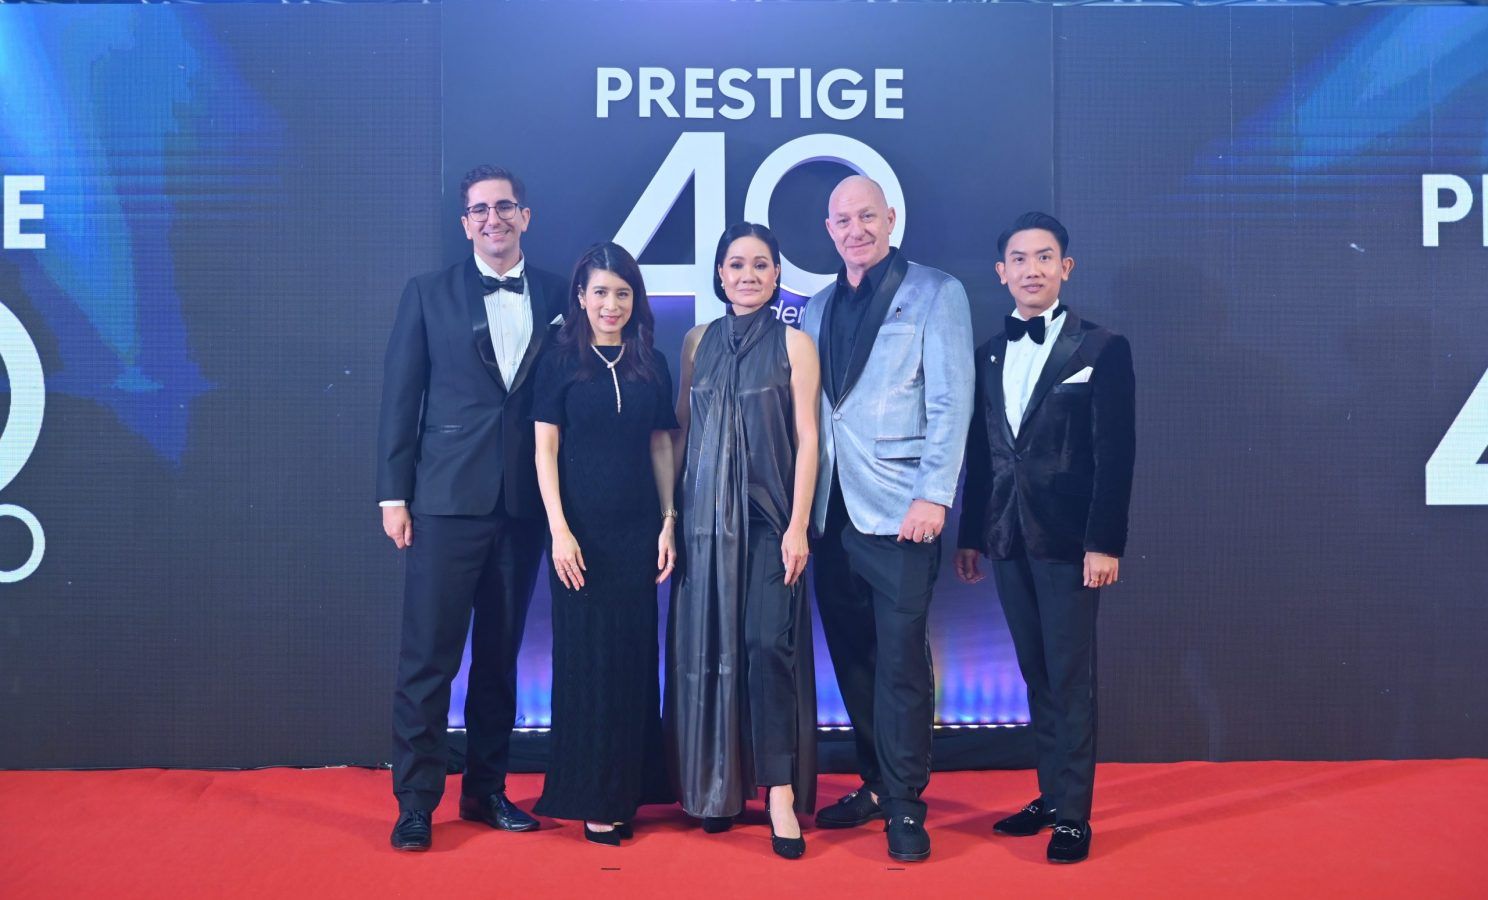 On the Red Carpet of the Prestige 40 Under 40: Class of 2022 Première